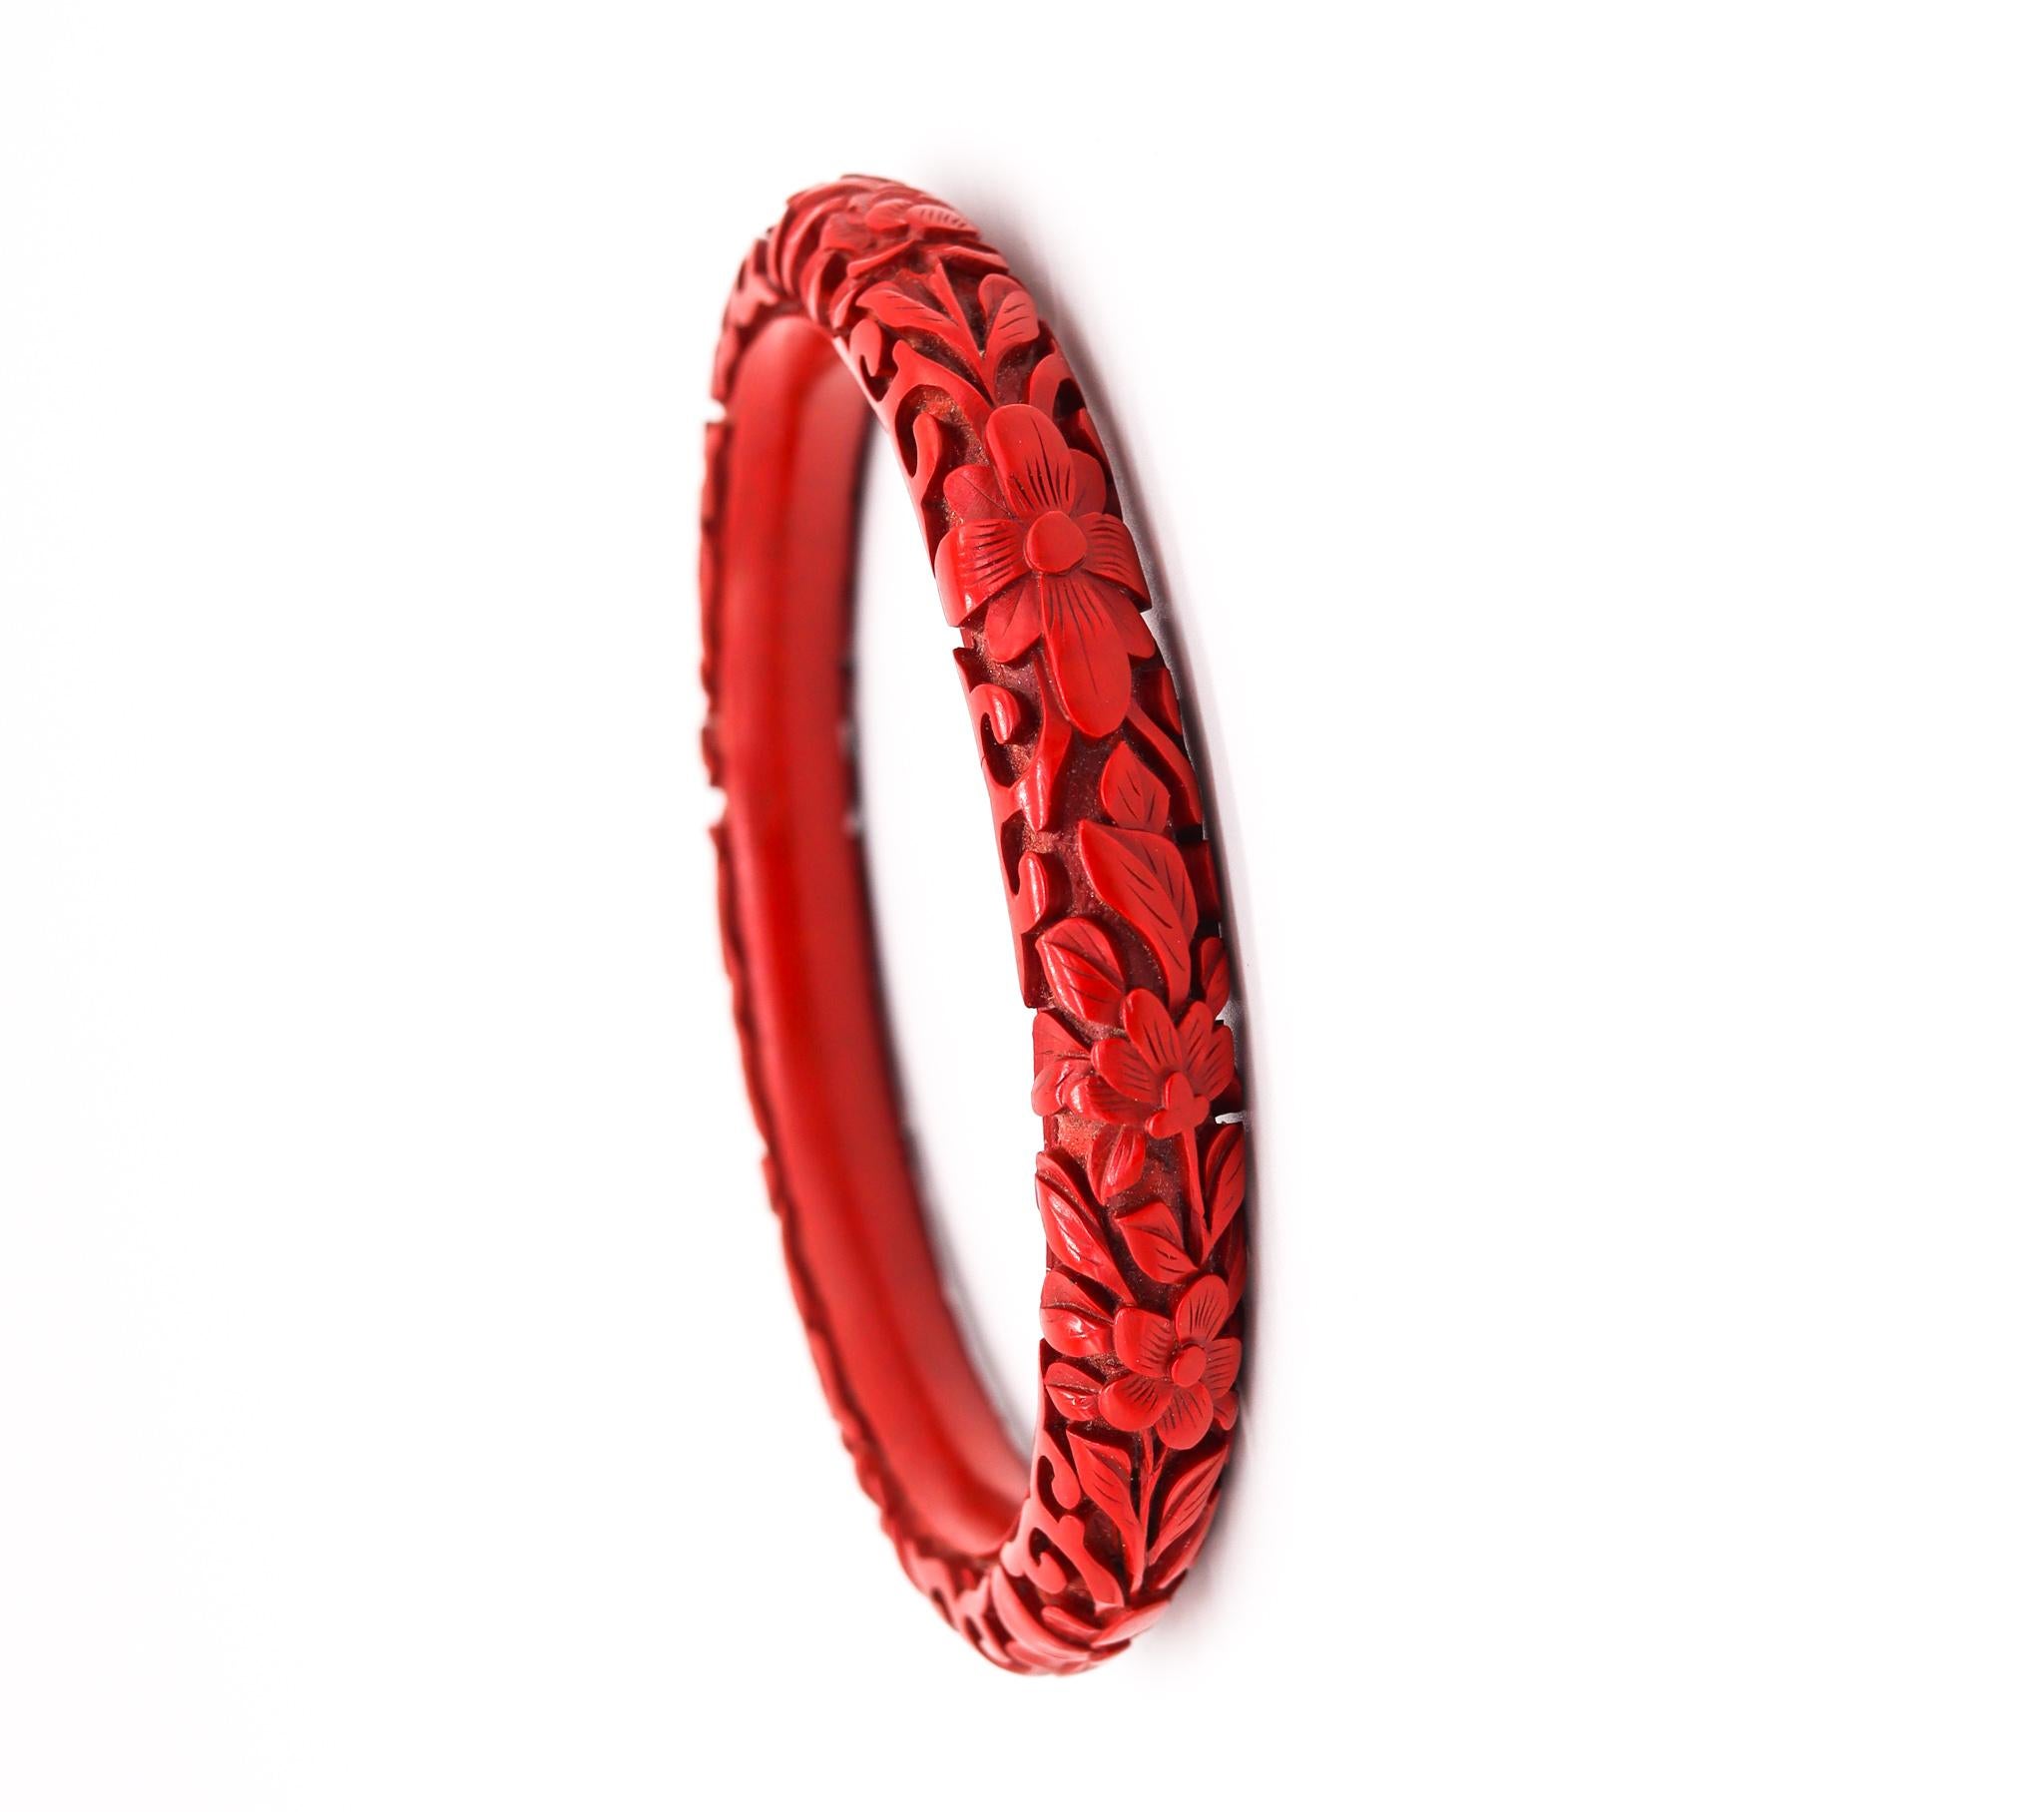 A Cinnabar lacquer bangle bracelet.

Very nice antique Chinese export bangle bracelet, made in the late 19th century during the Victorian era (1838-1901), circa 1900. It is finely made in wood with red cinnabar lacquer and carved with organic floral